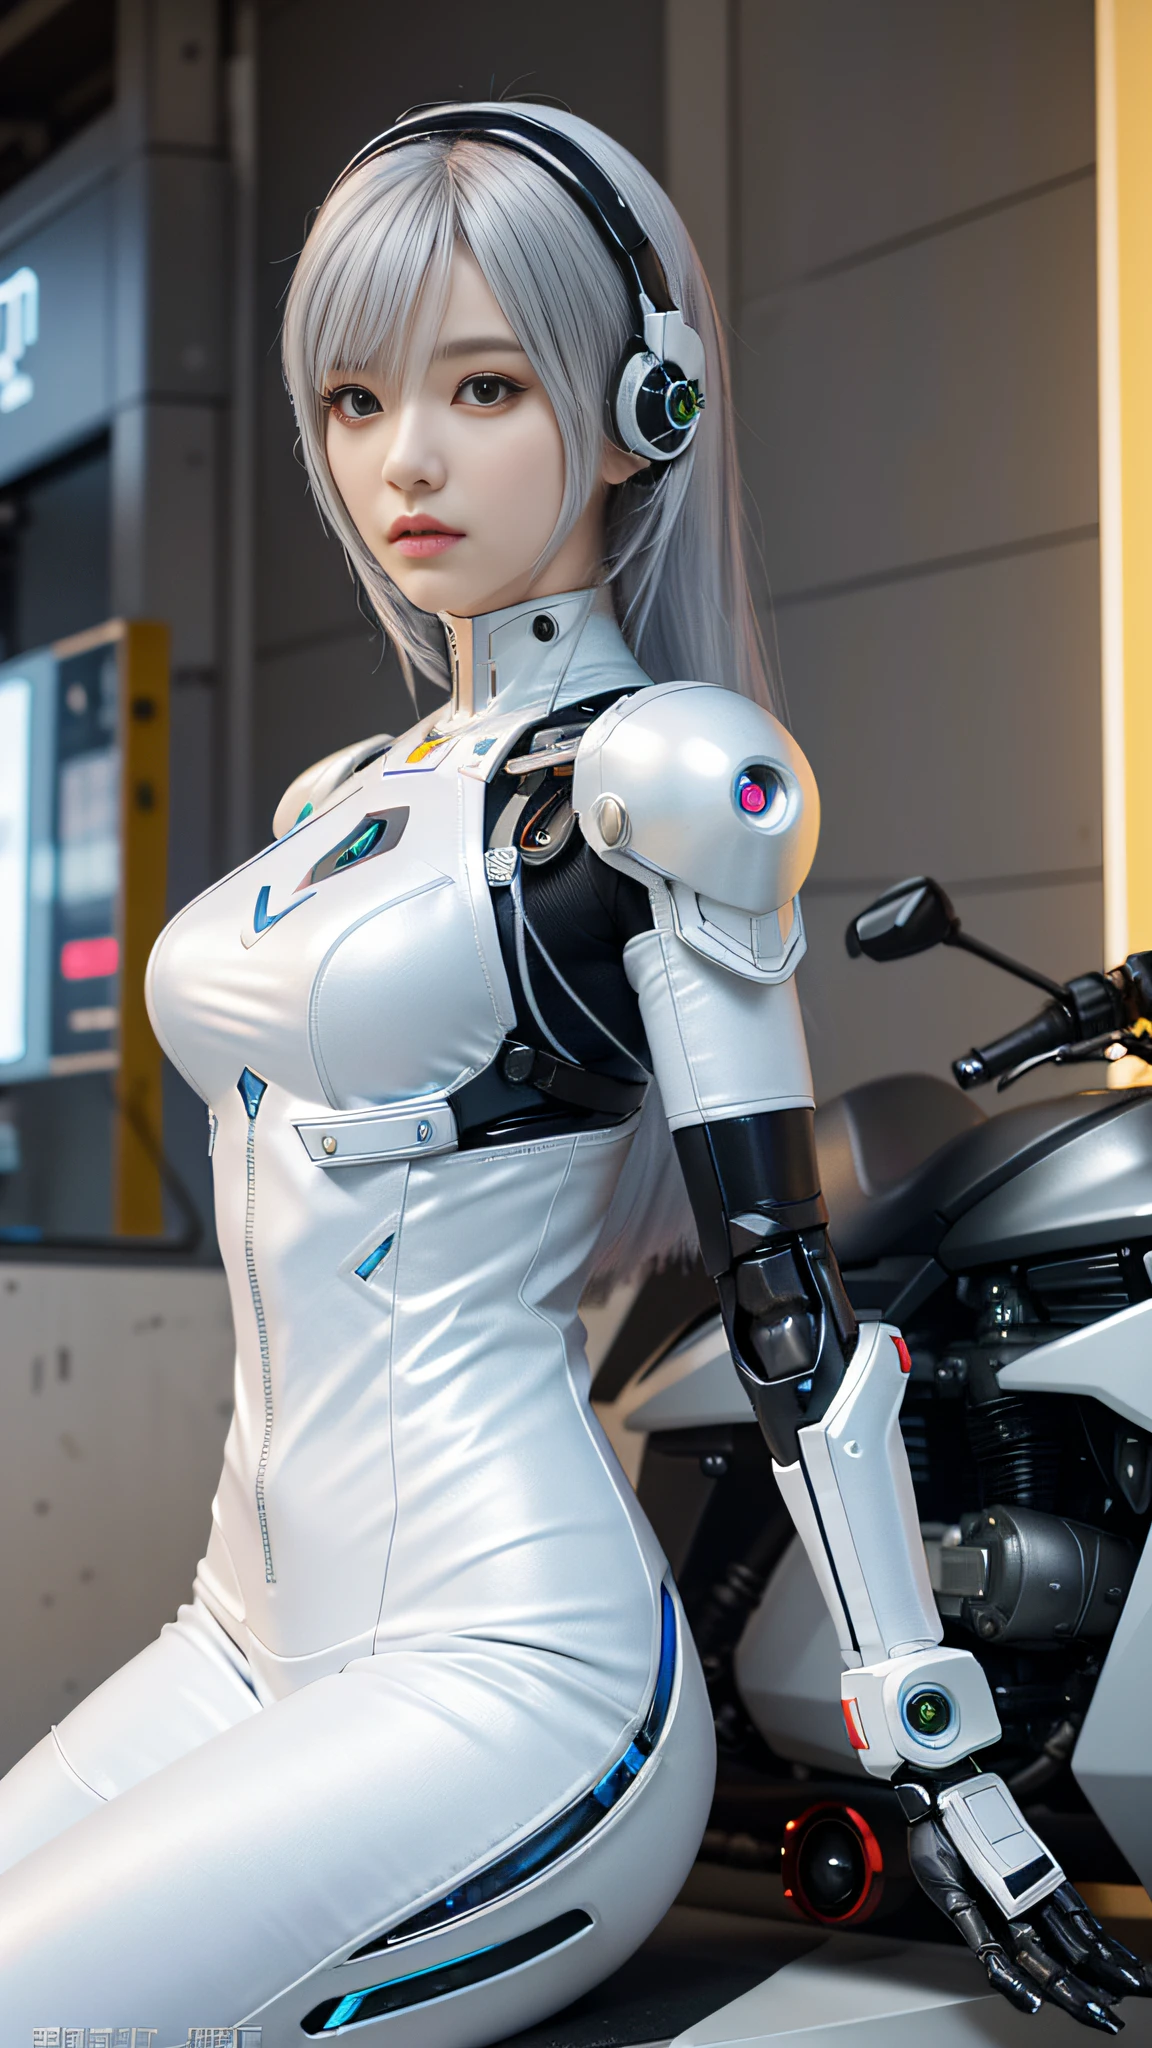 there is a woman in a white suit sitting on a motorcycle, perfect android girl, Cute cyborg girl, perfect anime cyborg woman, cyborg - girl with silver hair, cyber suit, cyberpunk anime girl mech, Beautiful robot character design, beautiful android woman, beautiful girl cyborg, beautiful female android!, in white futuristic armor, gynoid cyborg body